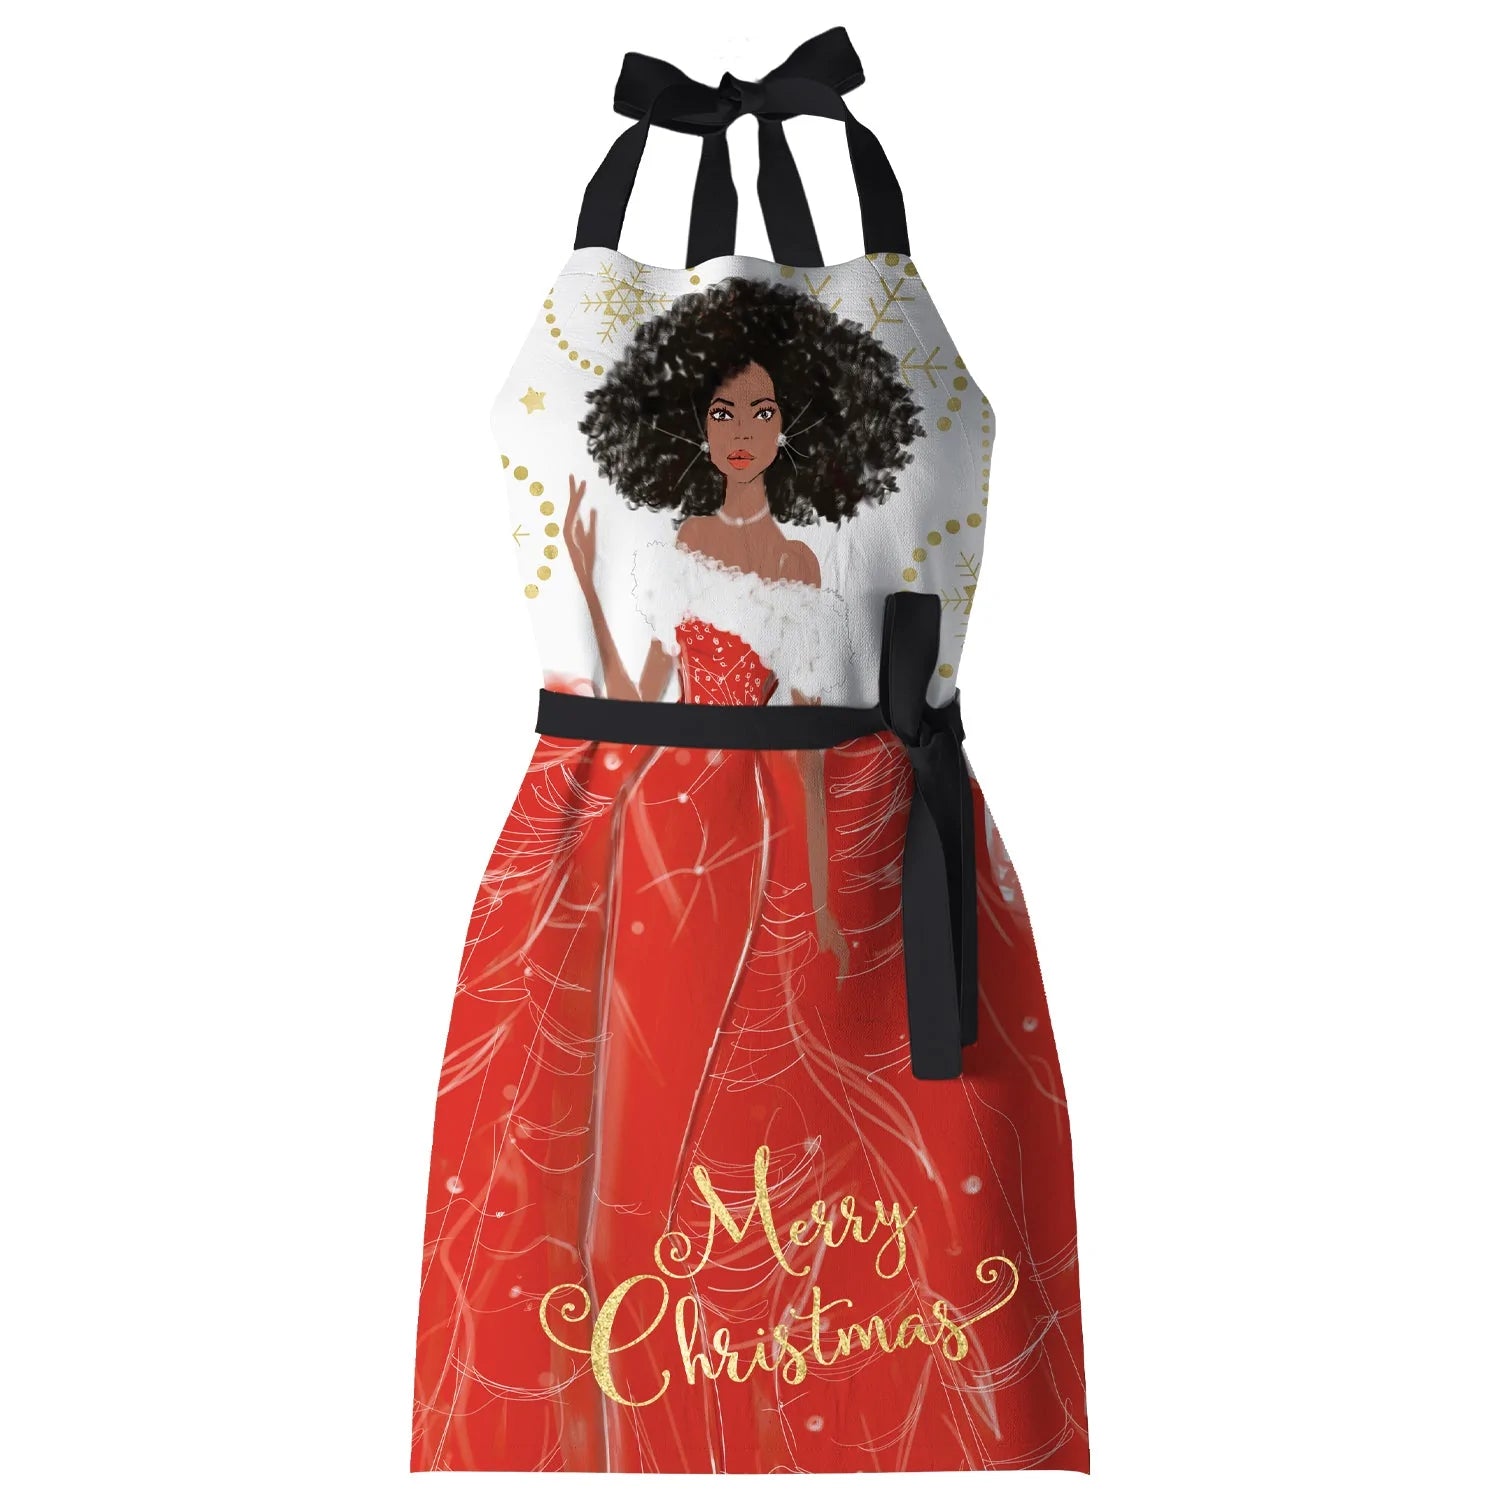 1 of 2: Merry Christmas by Nicholle Kobi: African American Kitchen Apron